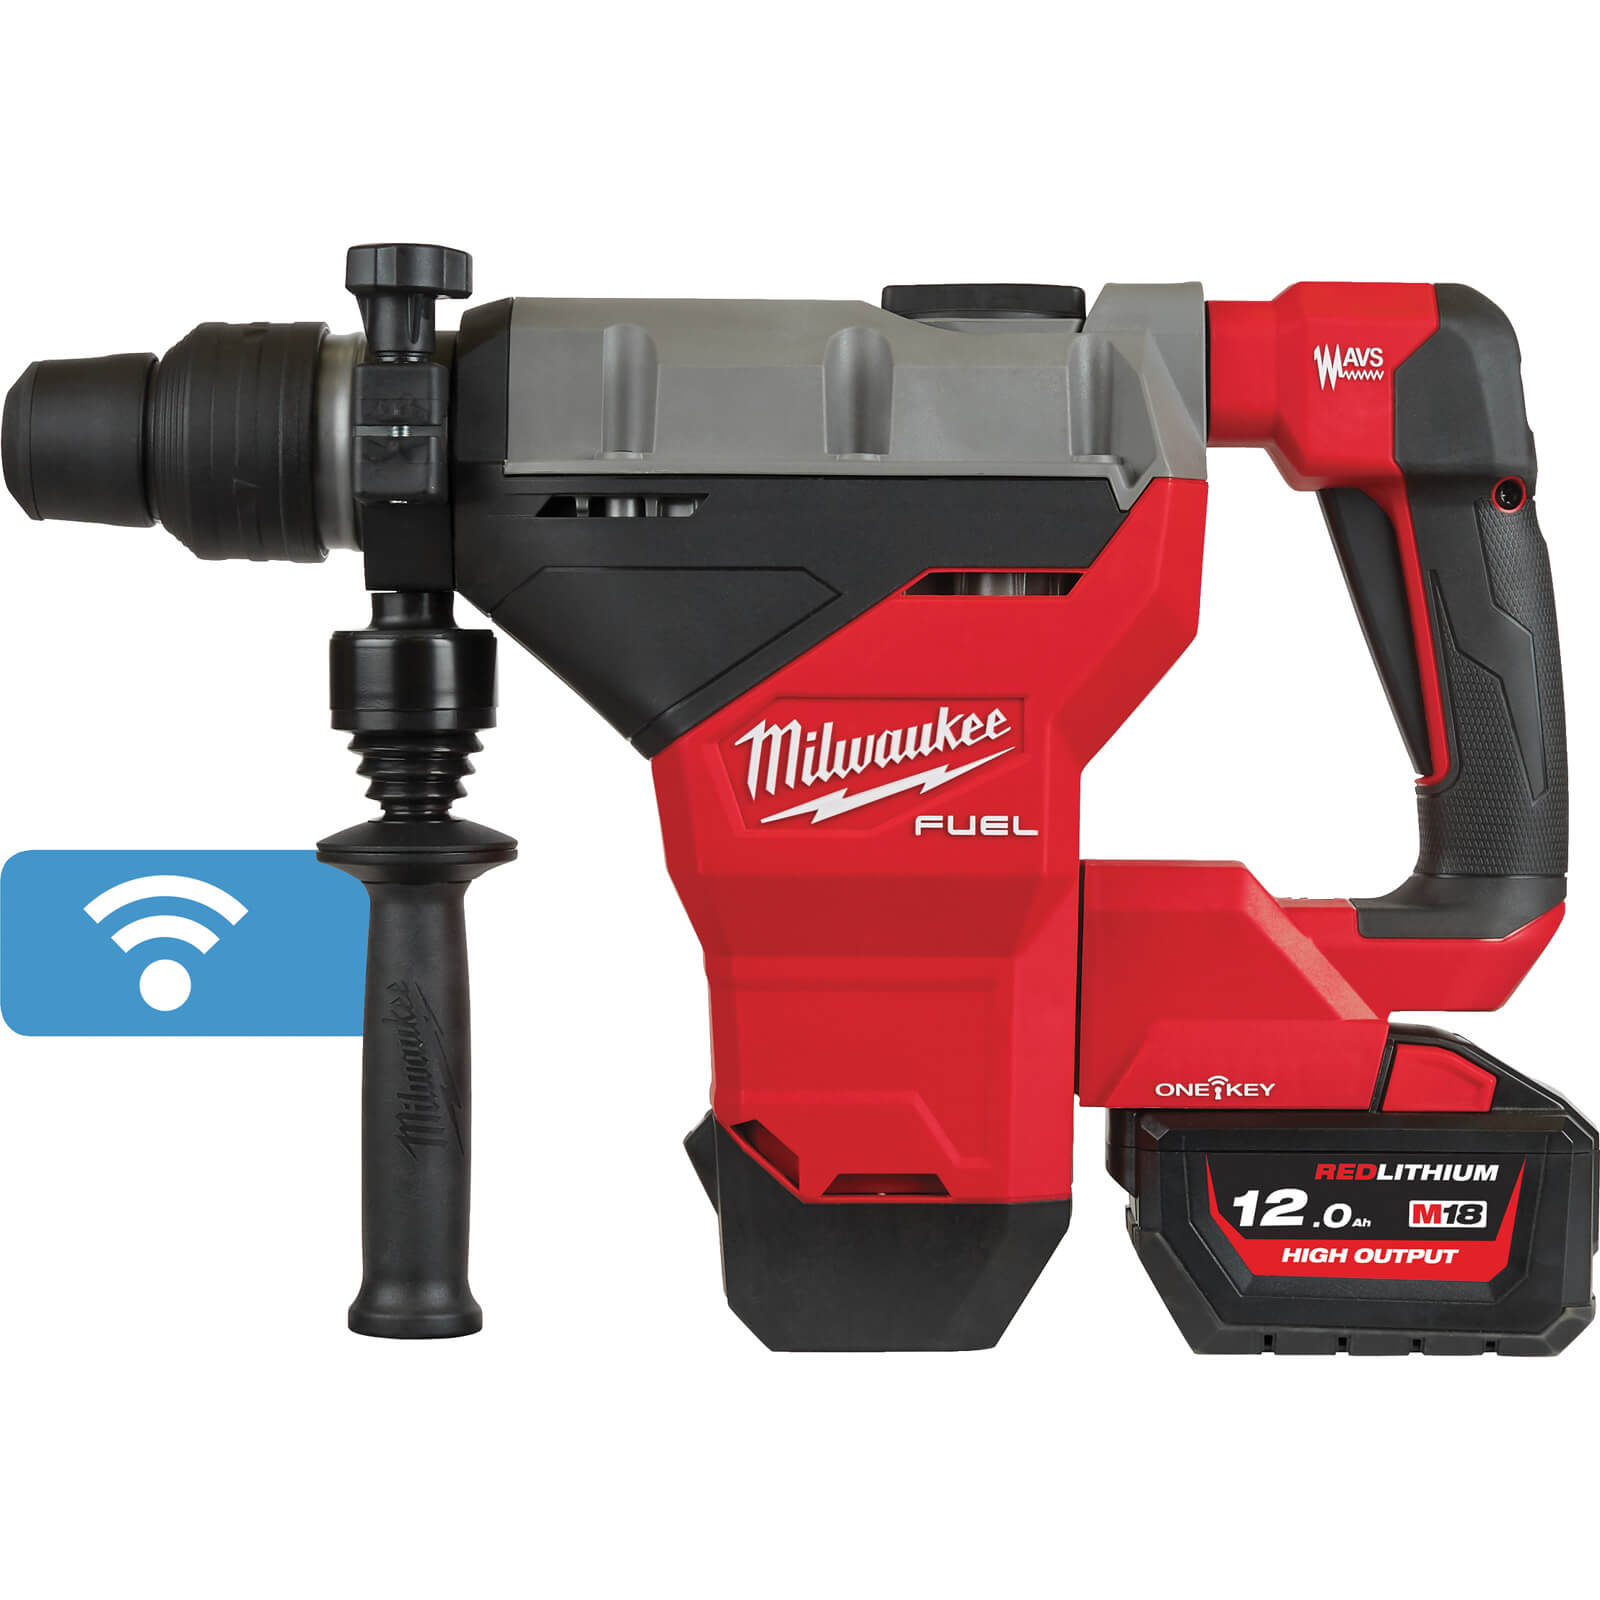 Milwaukee M18 FHM Fuel 18v Cordless Brushless SDS Max Hammer Drill 1 x 12ah Li-ion Charger Case